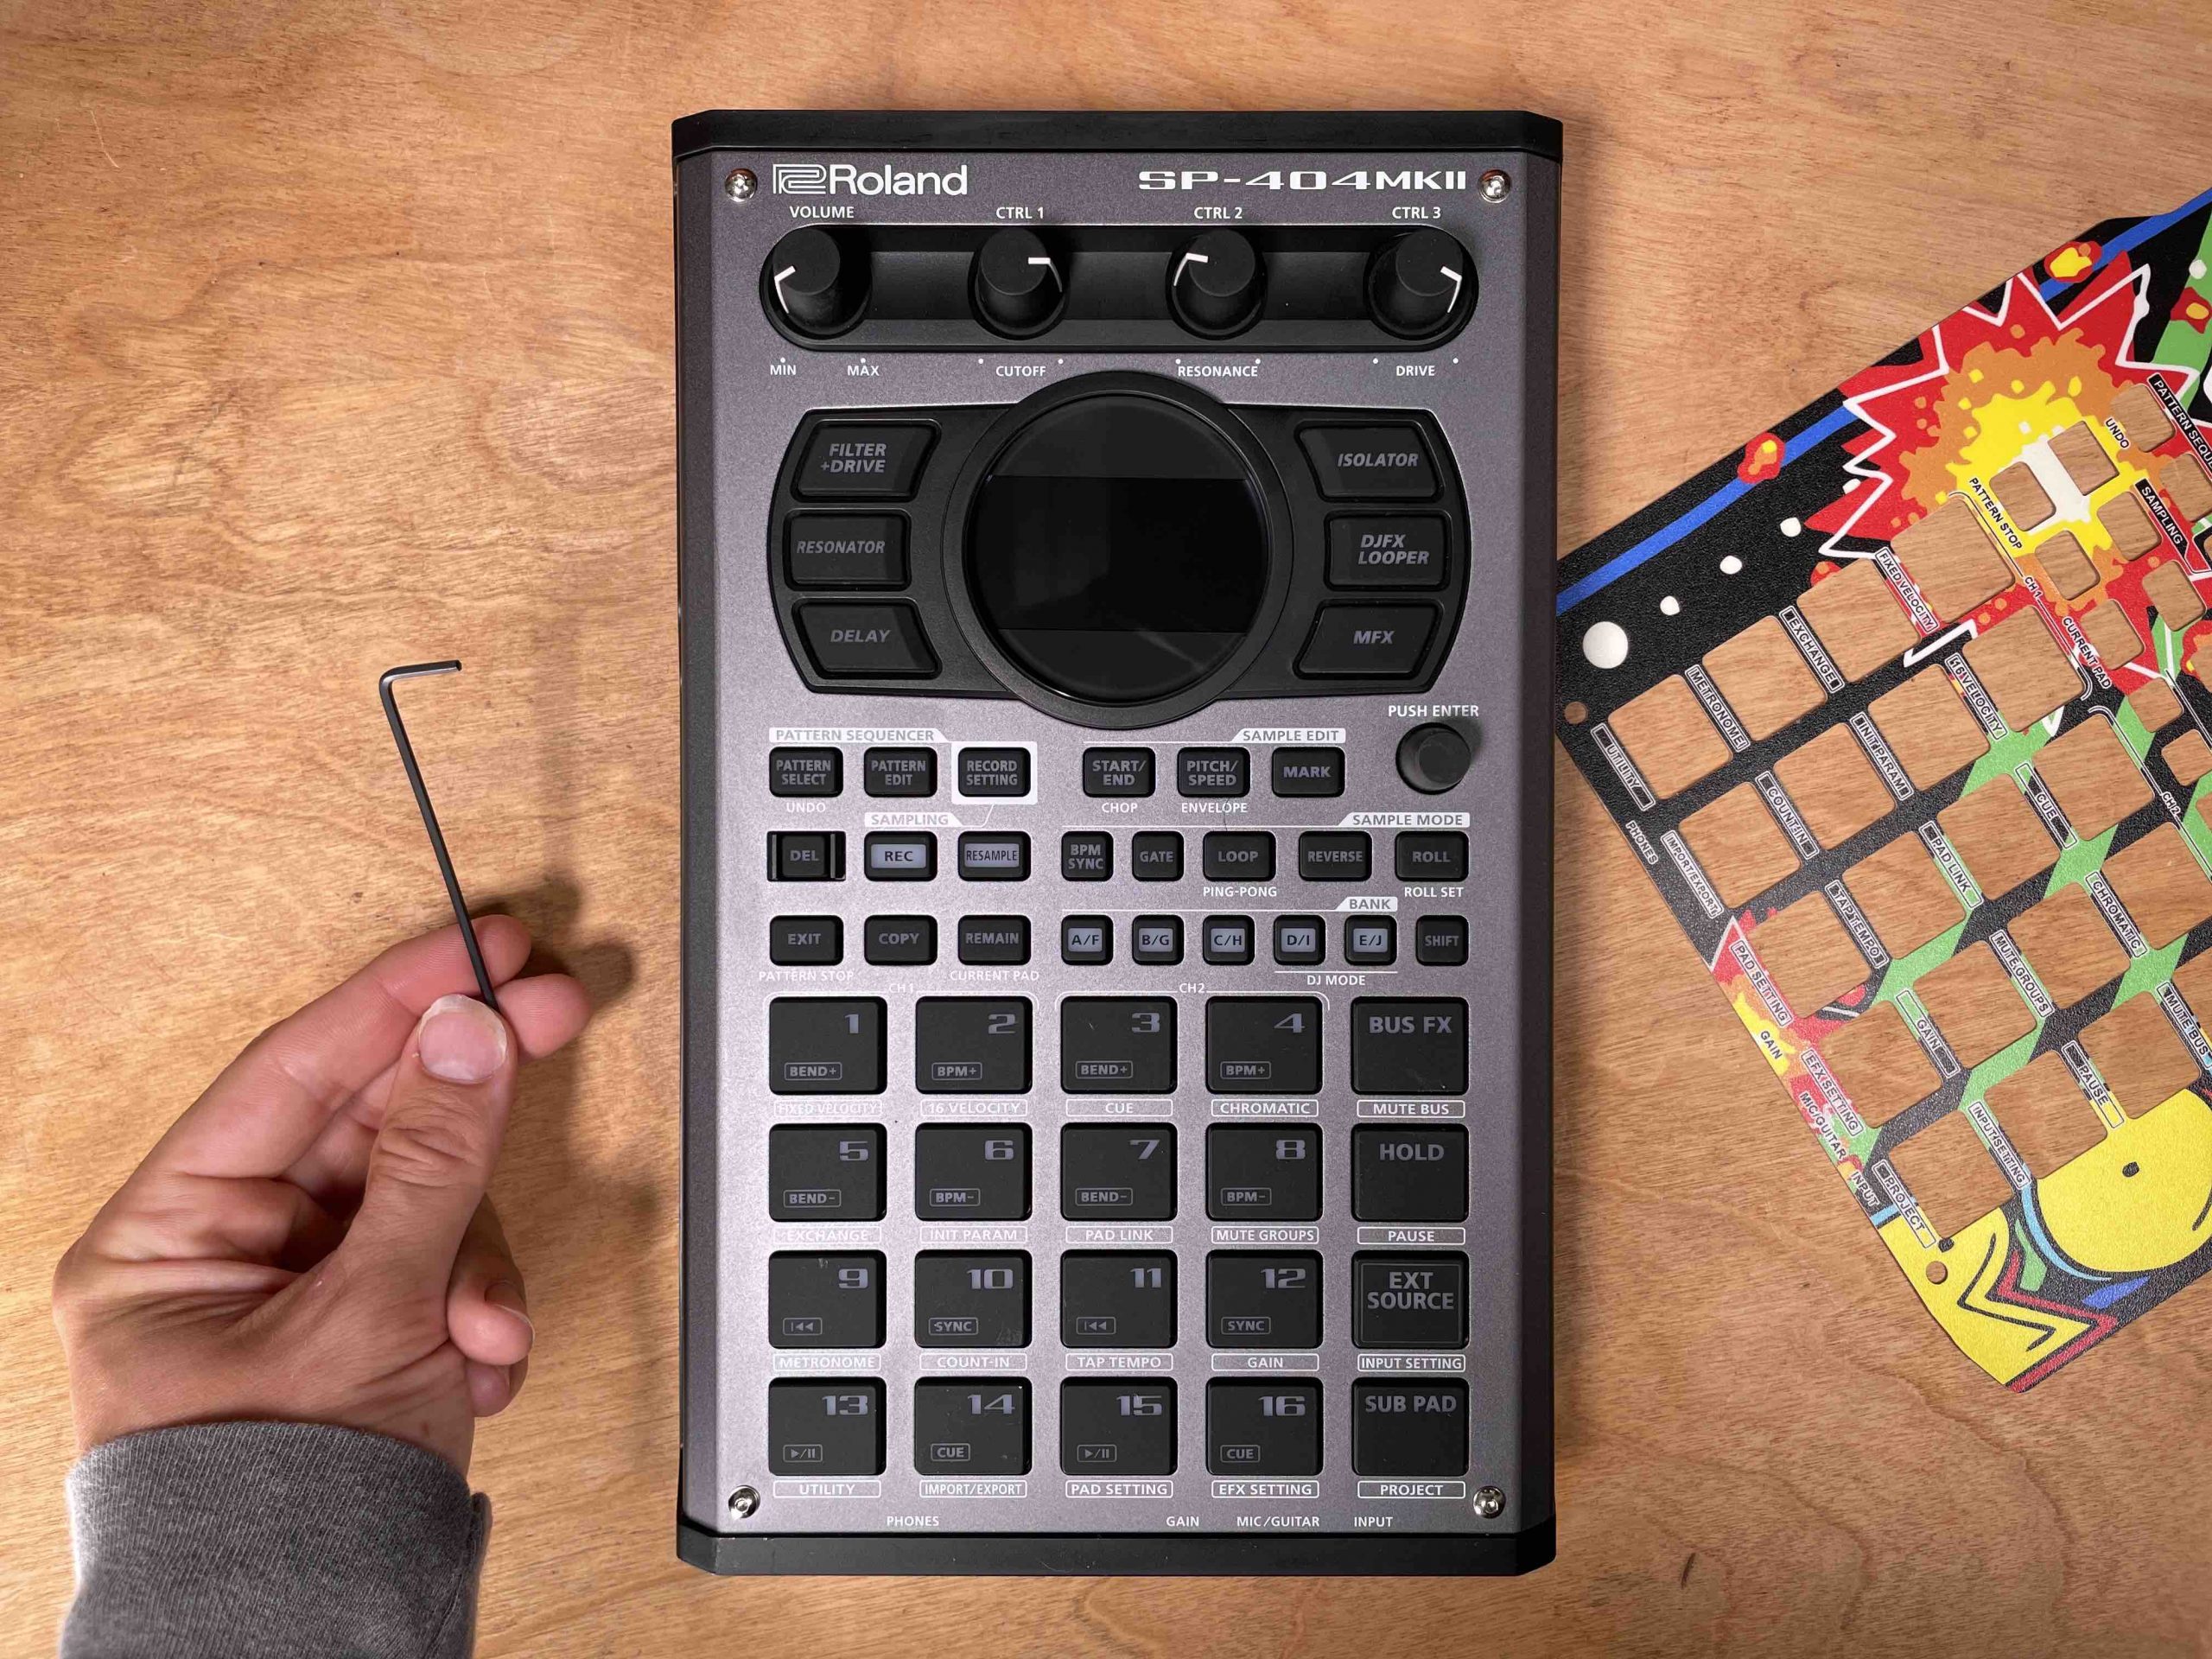 Ultimate Guide: Customizing the SP-404MKII - Roland Articles